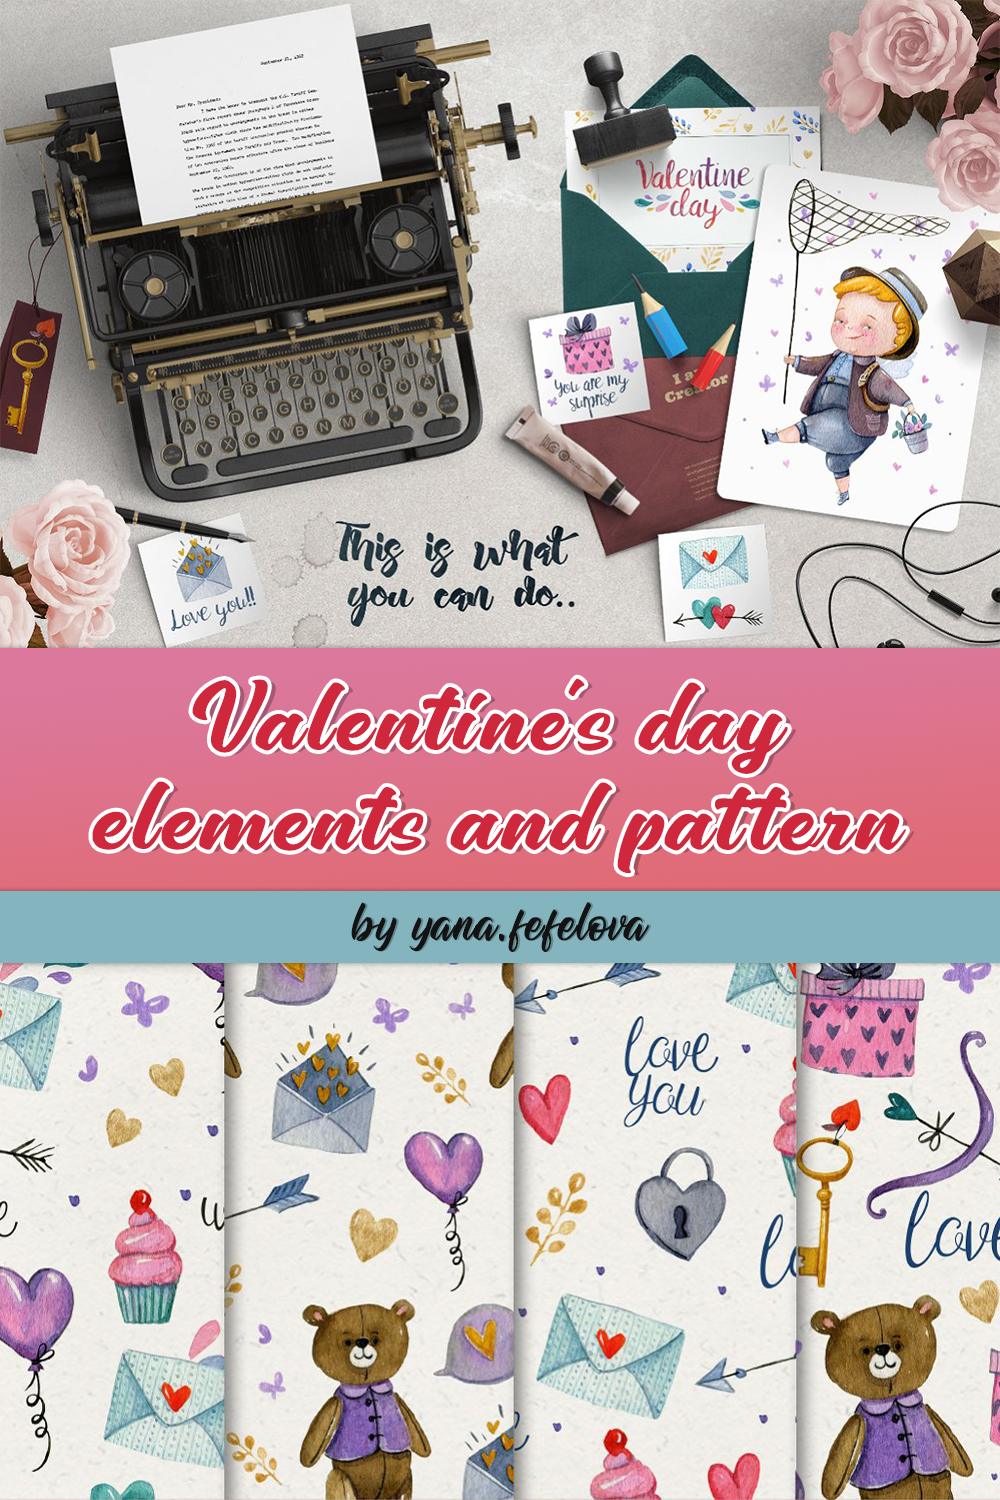 Valentines day elements and pattern of pinterest.